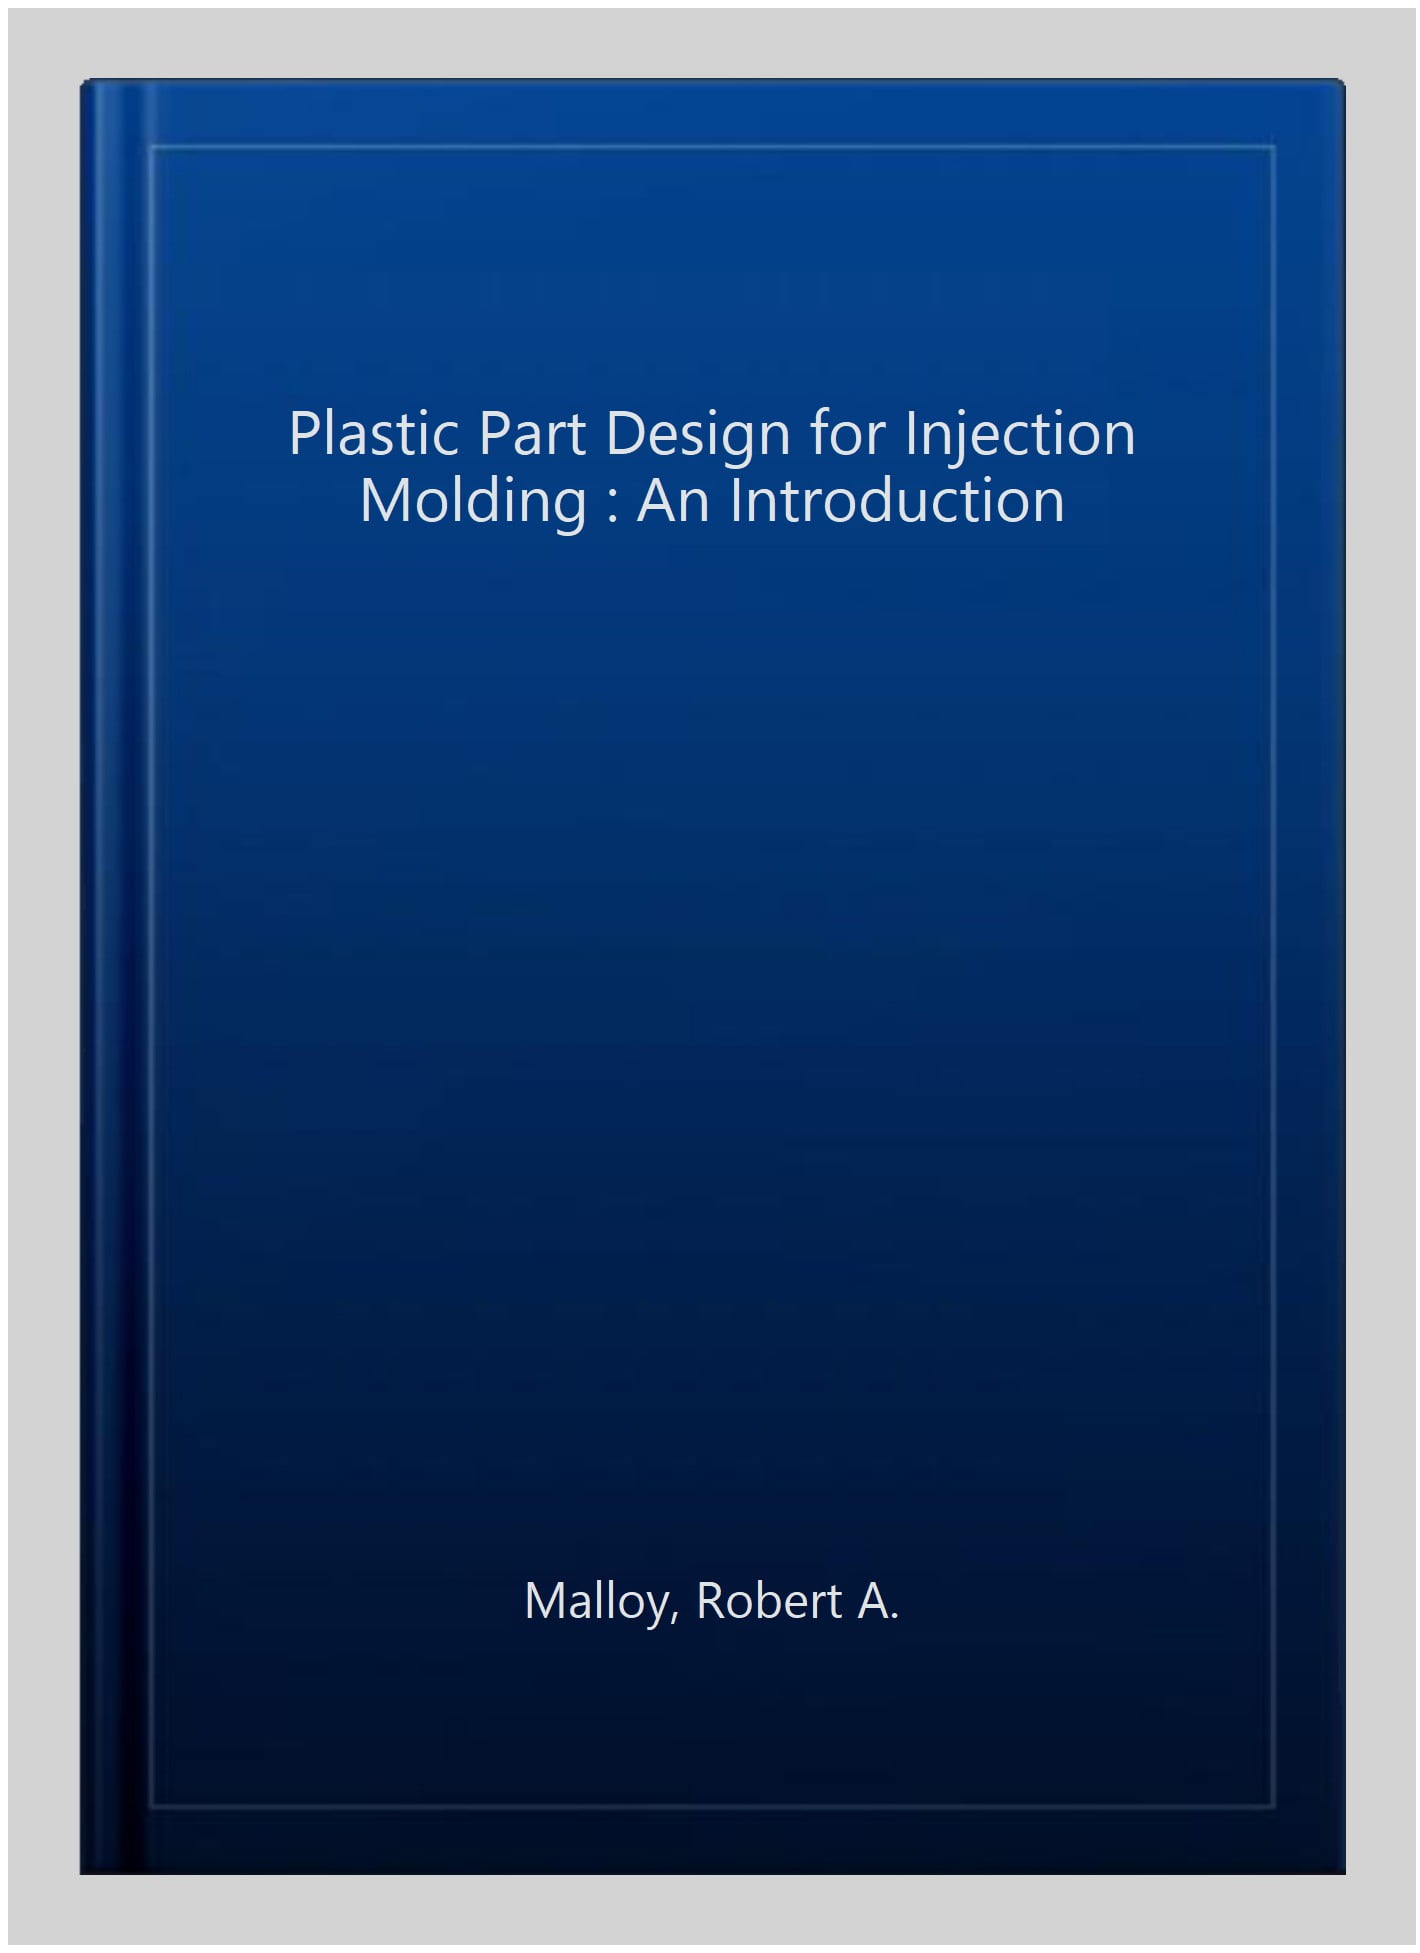 Molding　A.,　Hardcover　Pre-owned:　Injection　Design　Plastic　ISBN-13　Part　ISBN　for　Robert　An　Introduction,　by　Malloy,　1569904367,　9781569904367